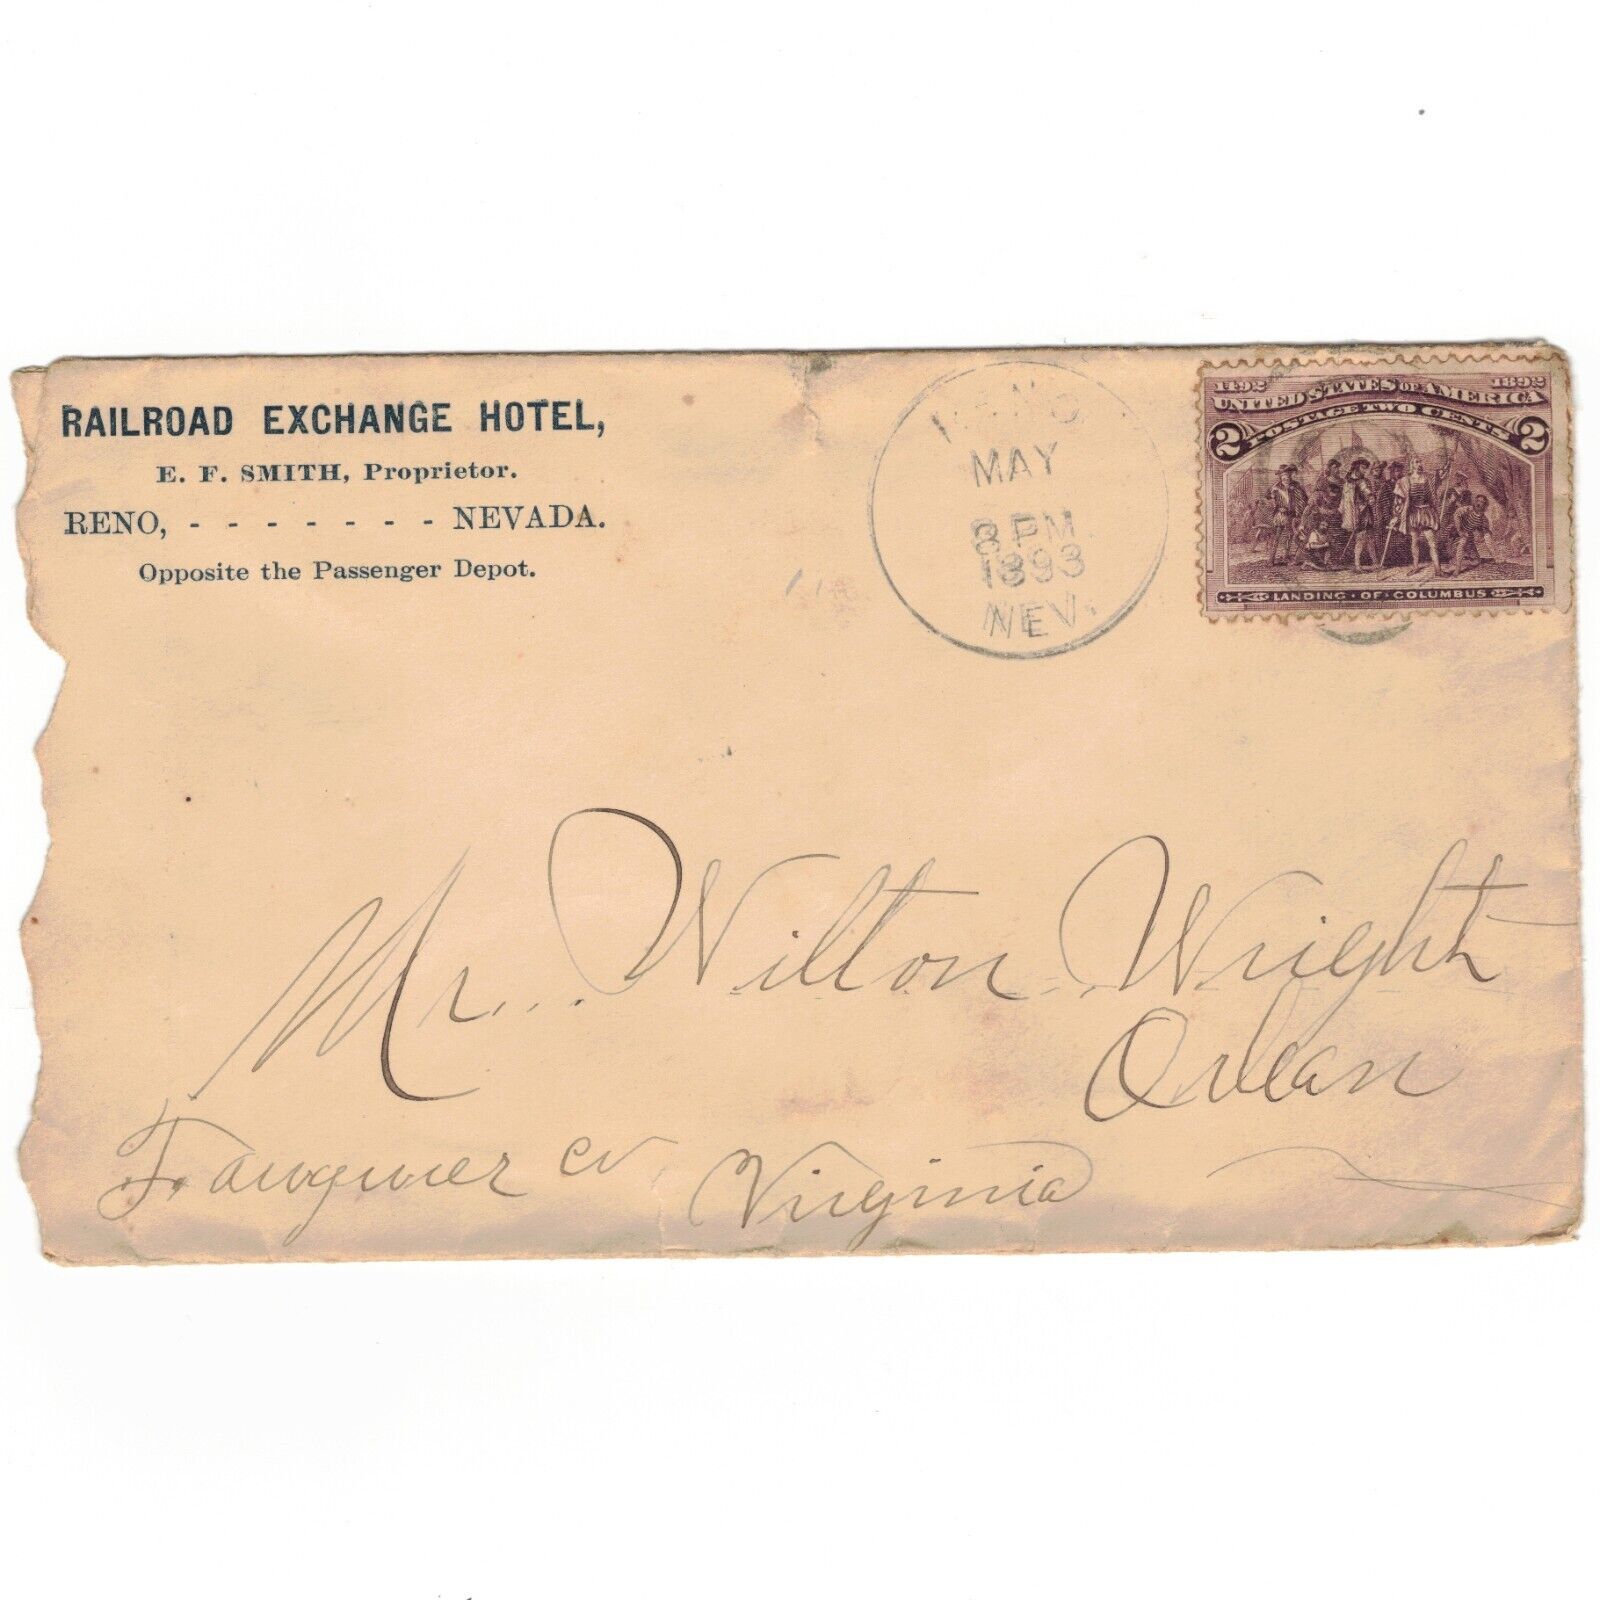 Vintage 1893 Railroad Exchange Hotel Envelope with 2¢ Stamp - Rare Collectible